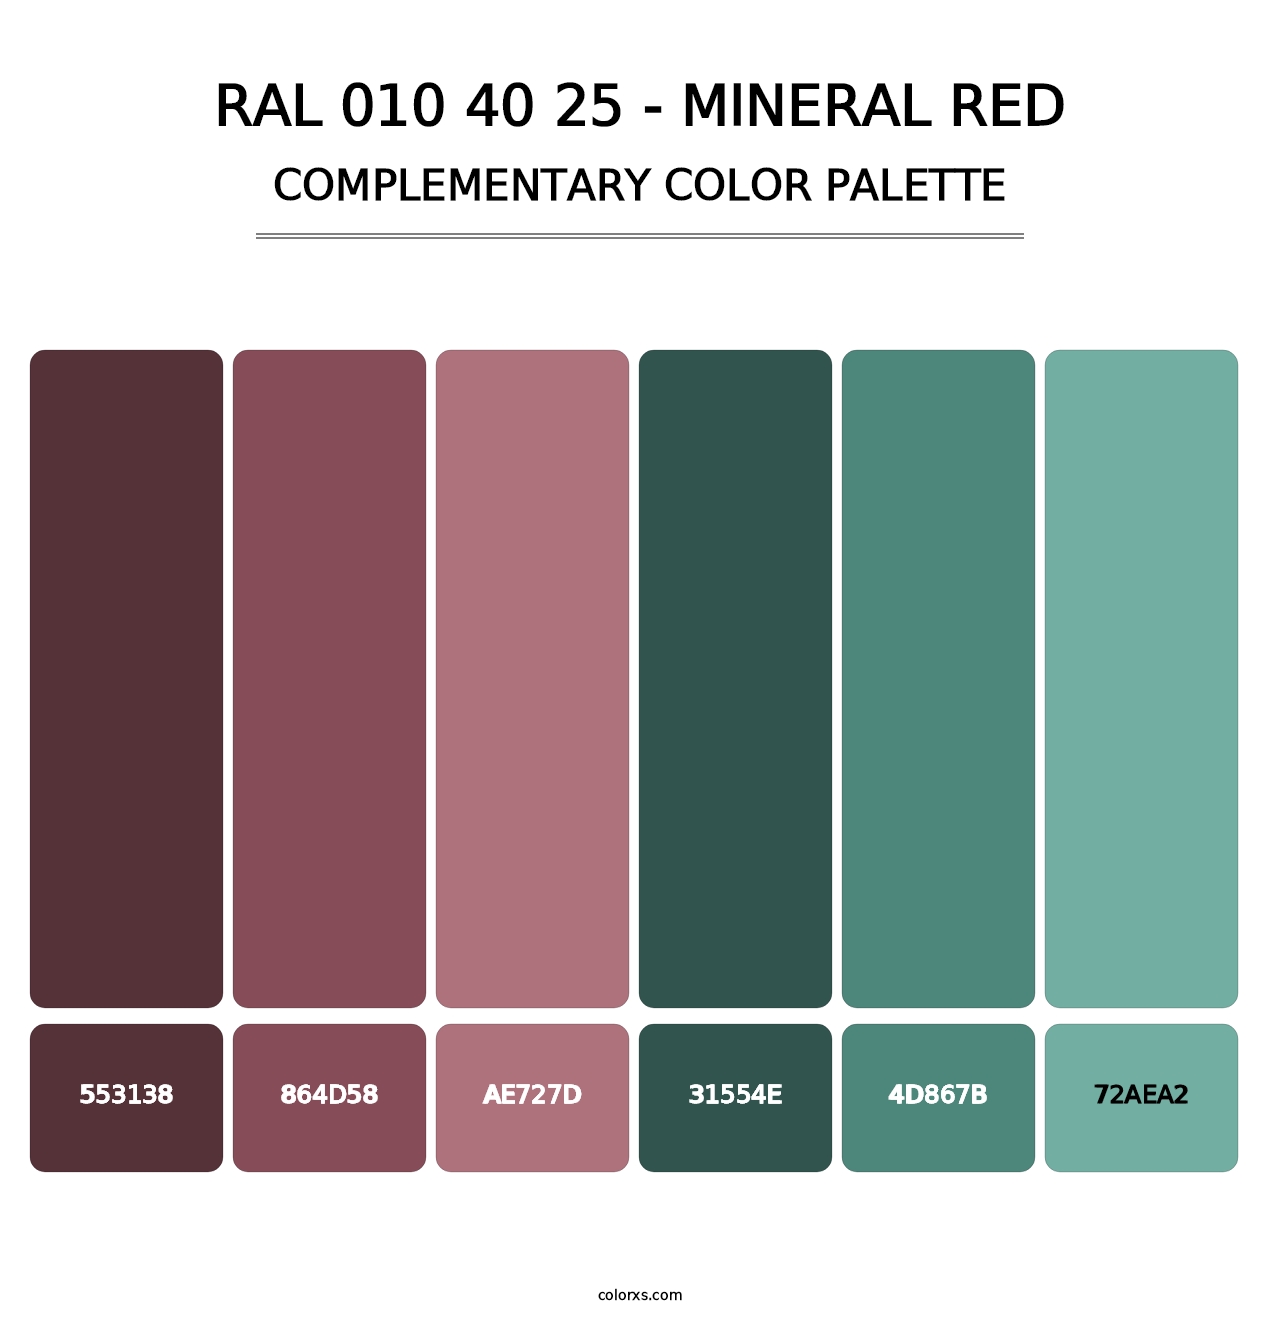 RAL 010 40 25 - Mineral Red - Complementary Color Palette